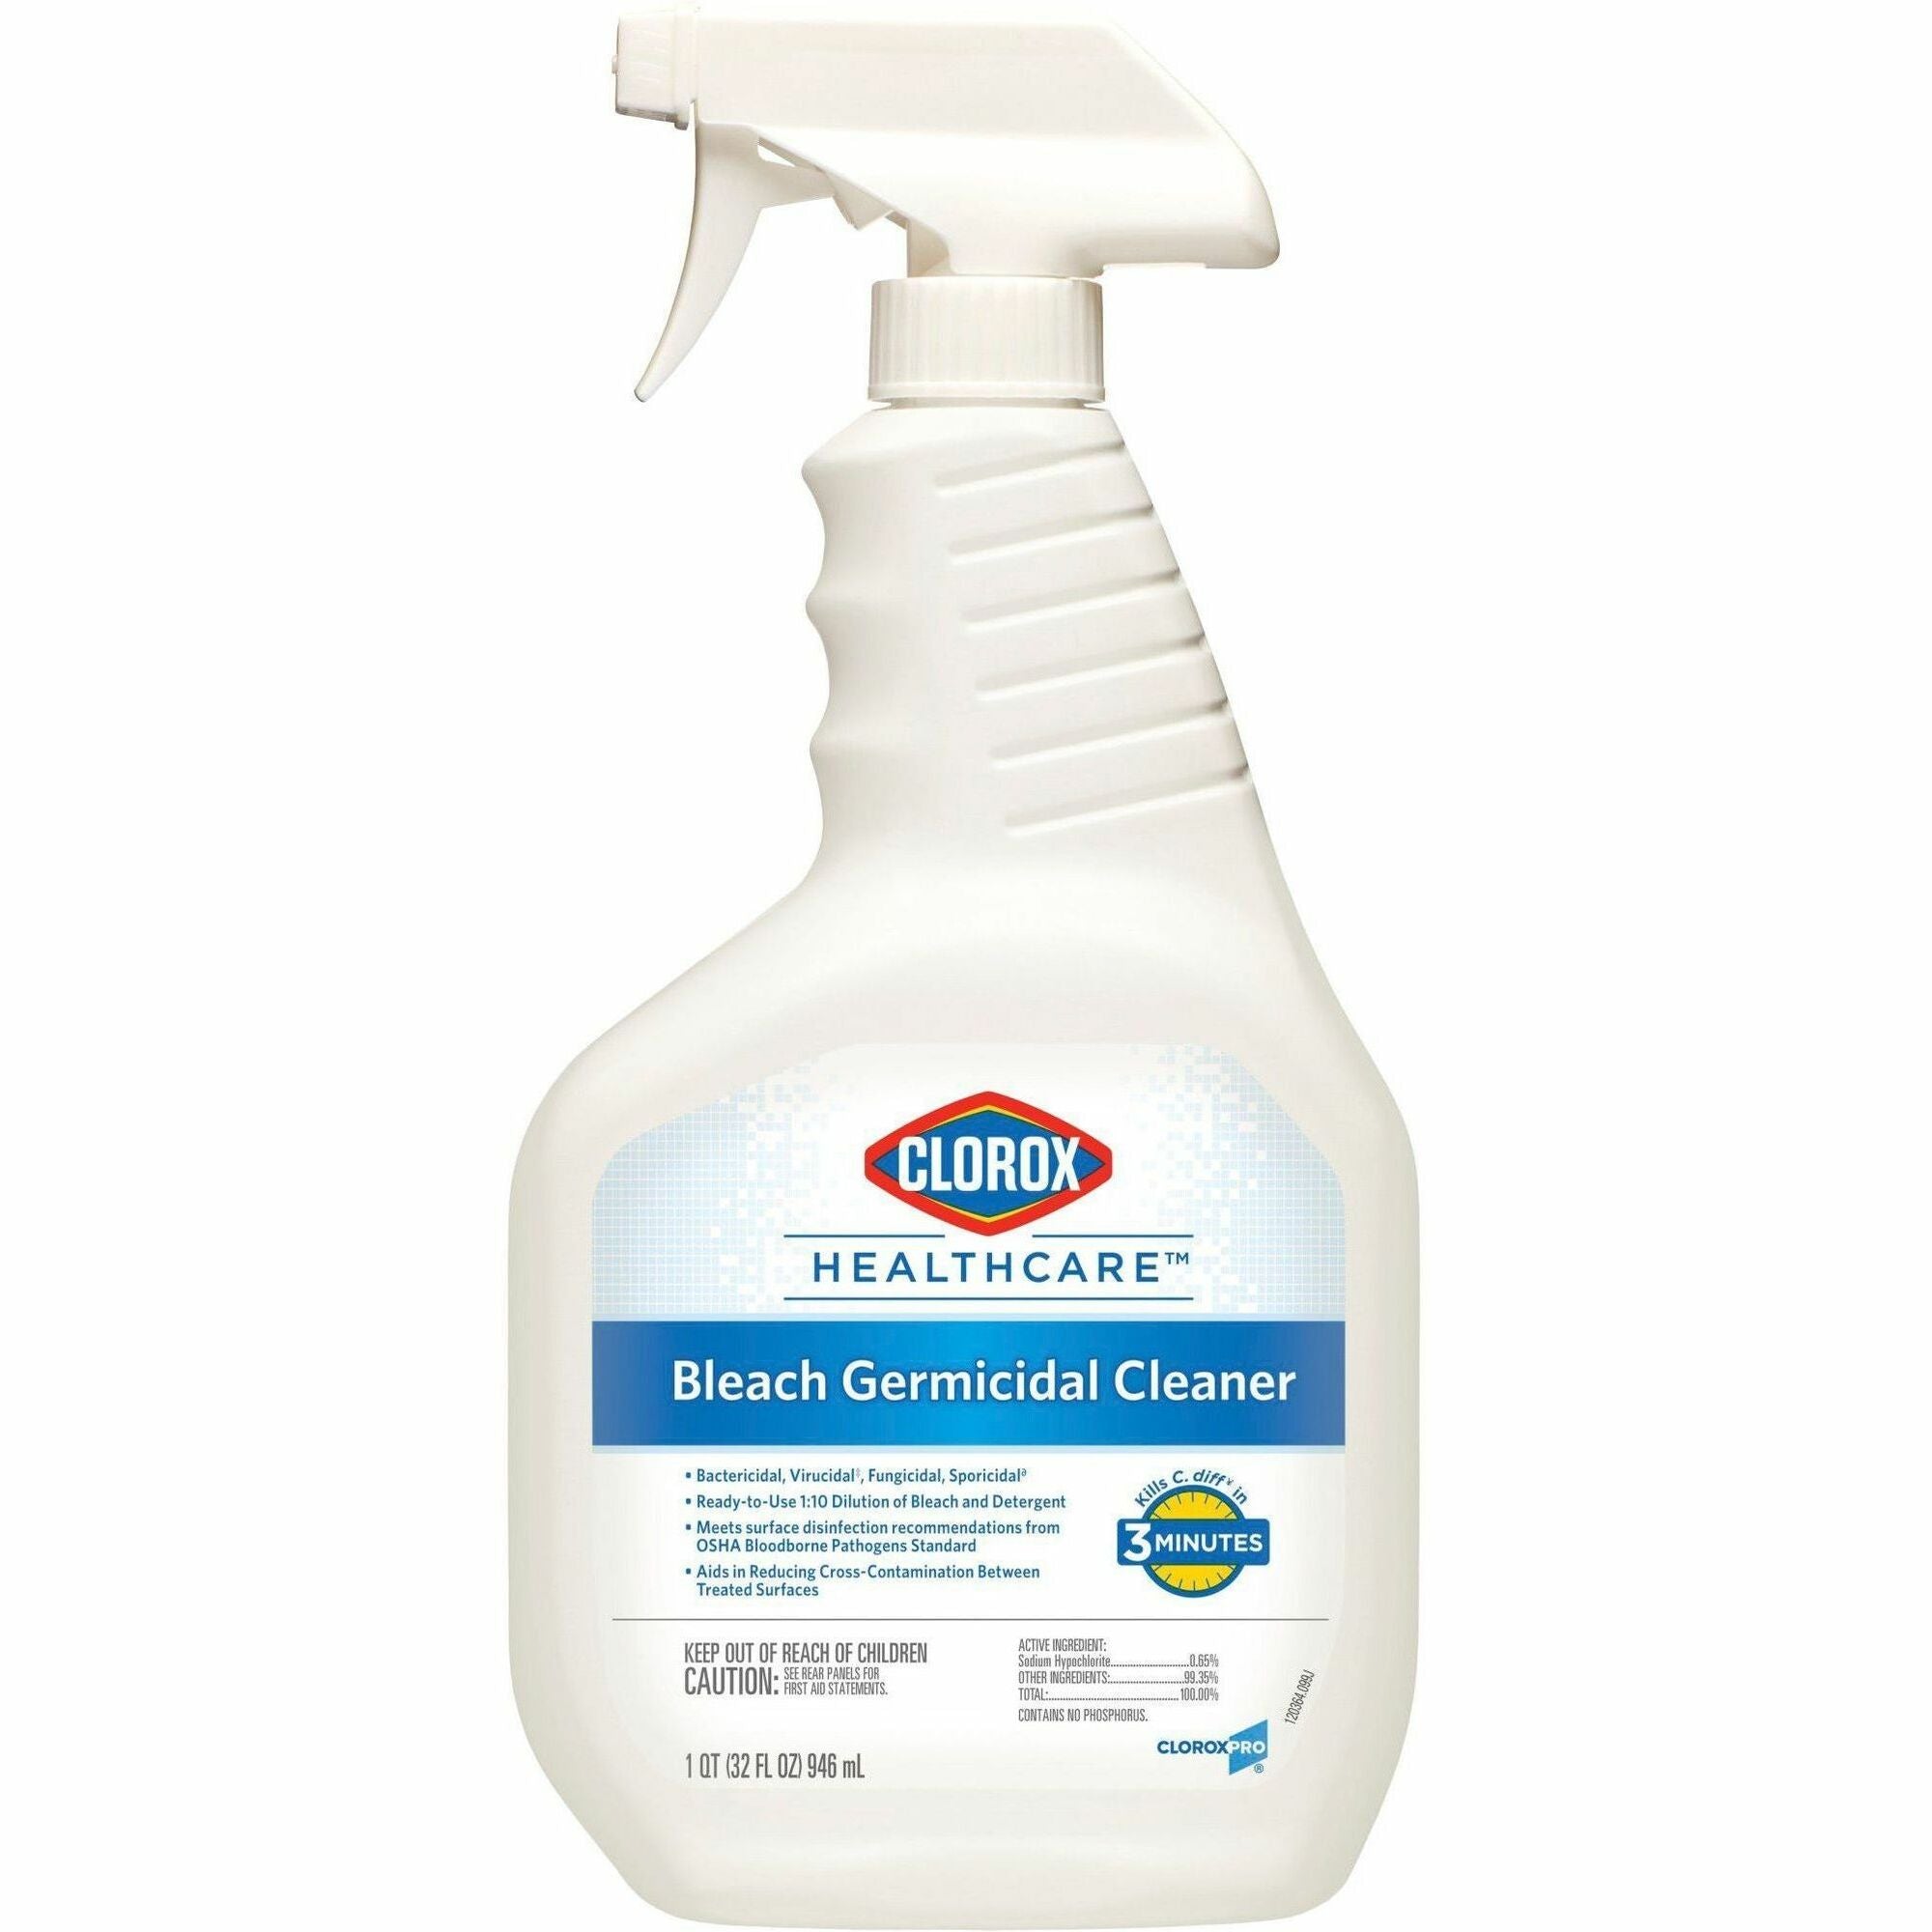 Clorox Healthcare Bleach Germicidal Cleaner - Ready-To-Use - 32 fl oz (1 quart)Bottle - 180 / Bundle - Anti-corrosive, Antibacterial, Disinfectant - White, Clear - 1